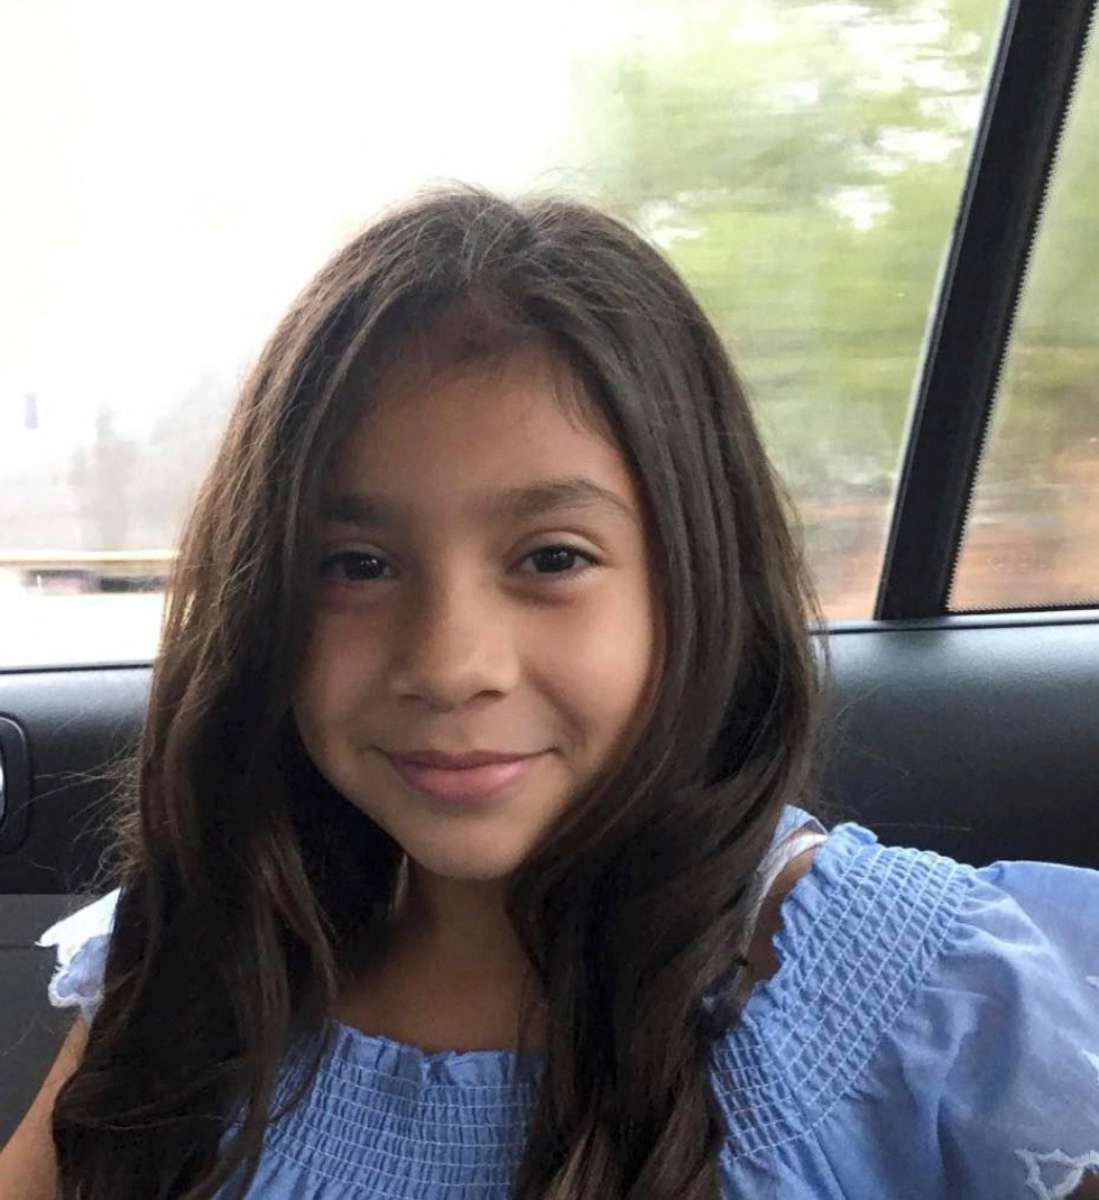 PHOTO: Nevaeh Bravo one of the victims of the mass shooting Robb Elementary School in Uvalde, Texas is seen in this undated photo obtained from social media.